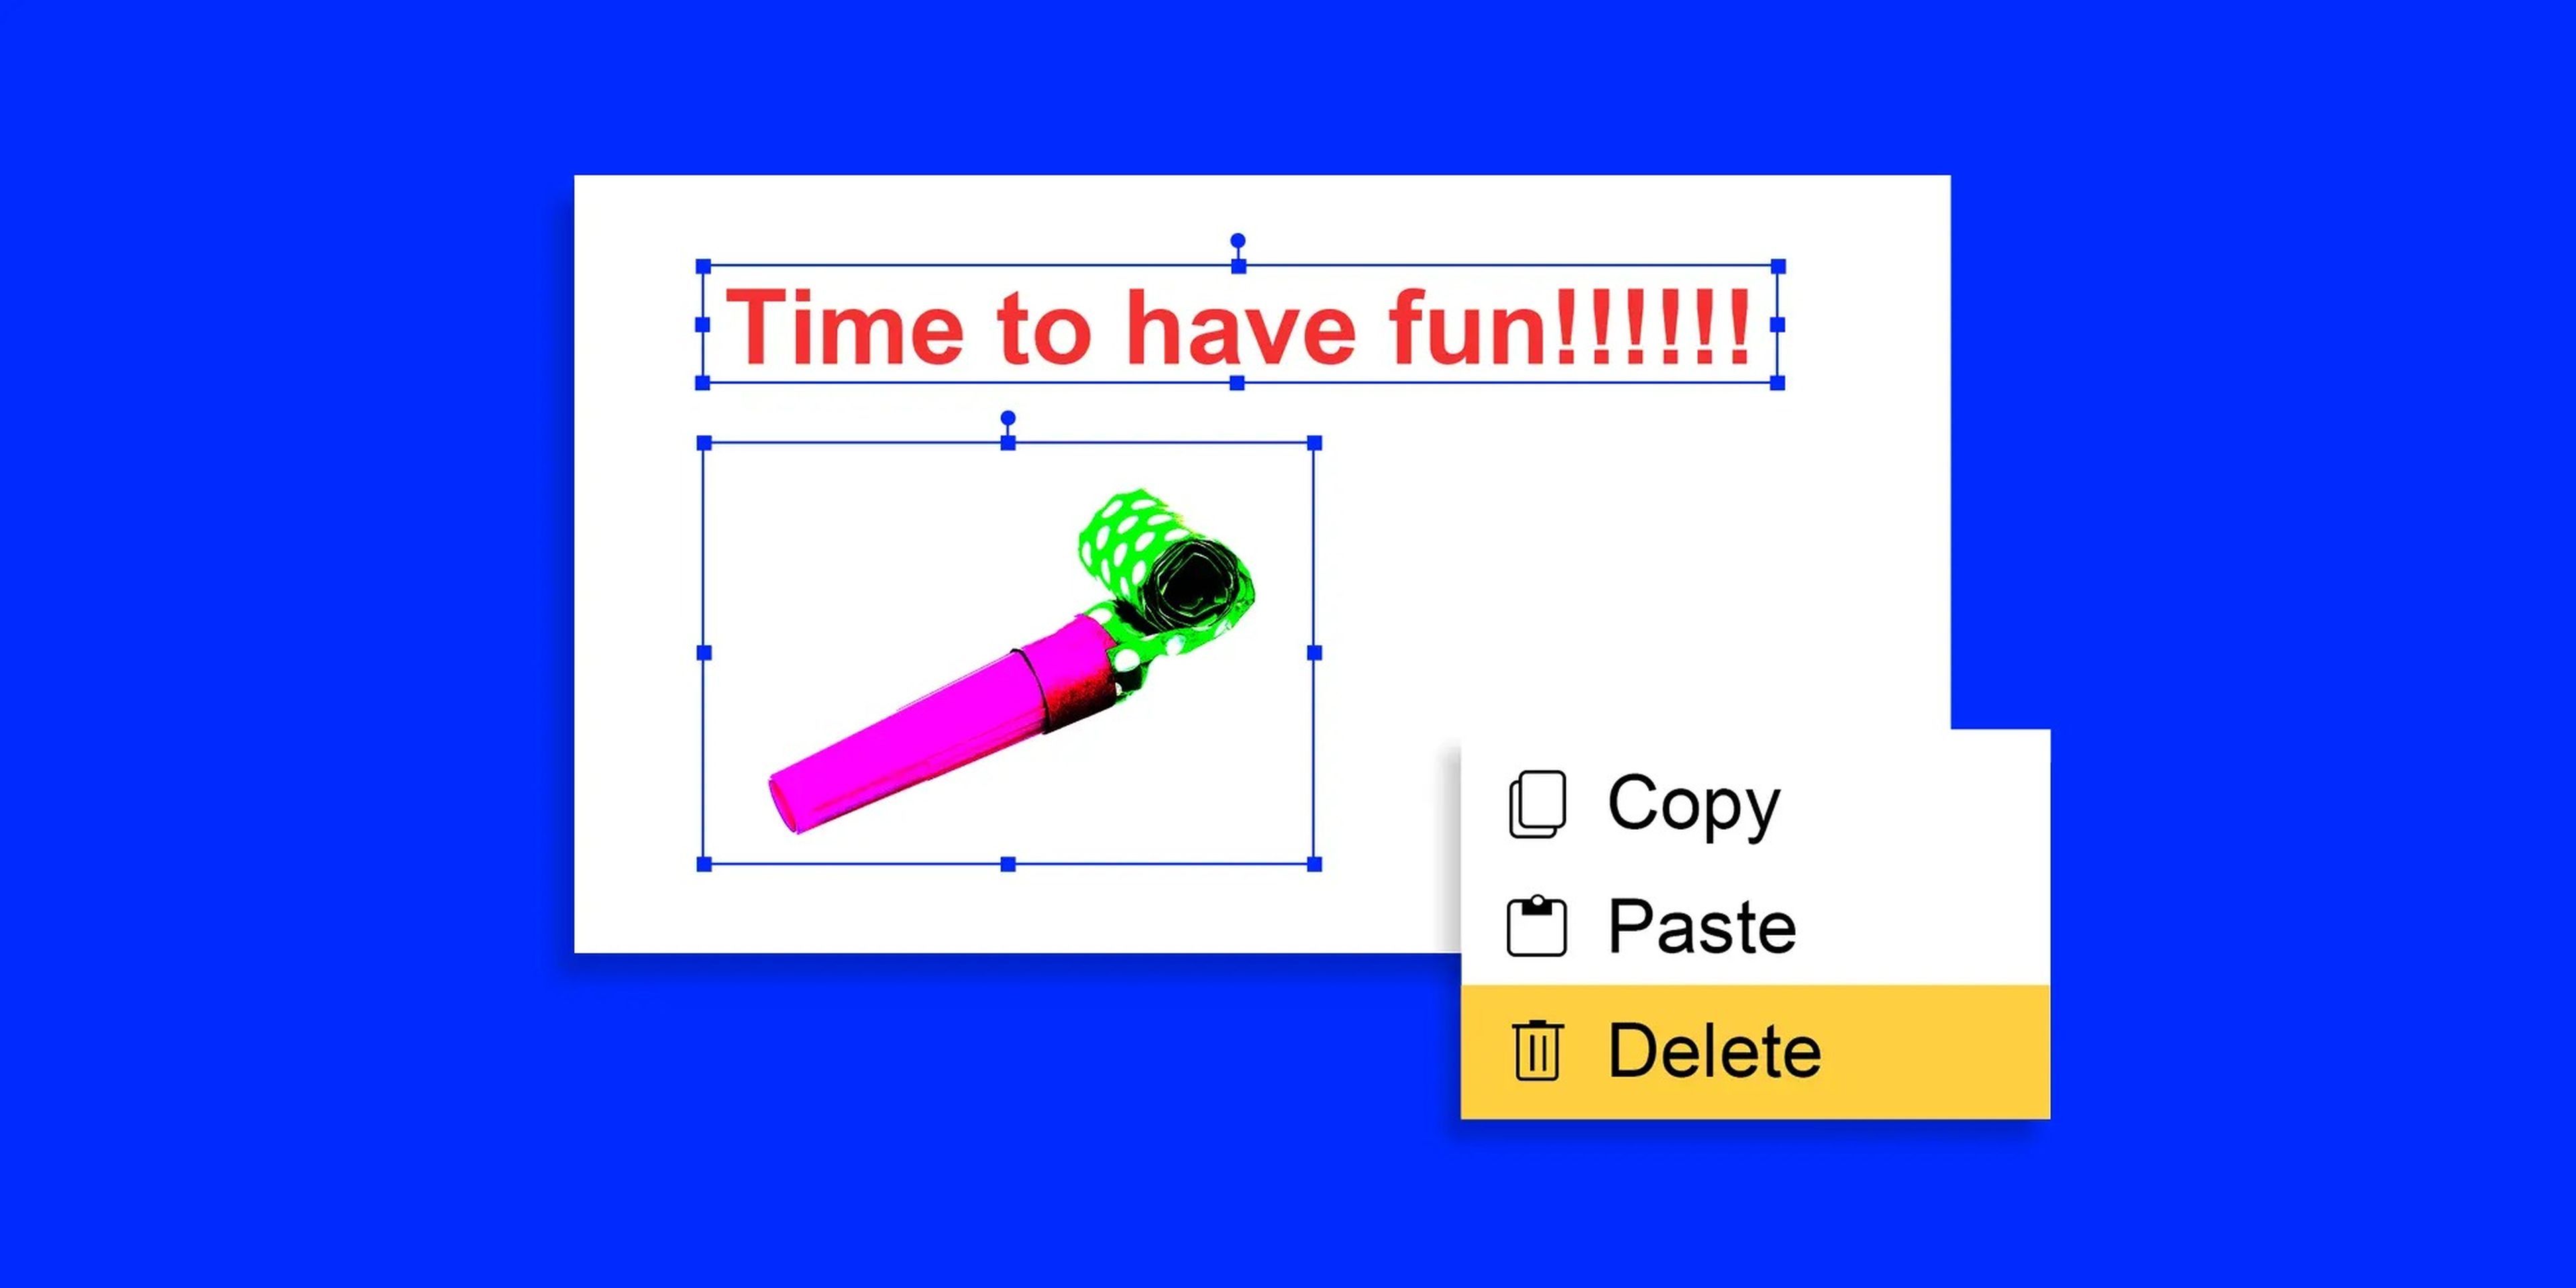 A powerpoint slide that says "Time to have fun!!!!" being deleted